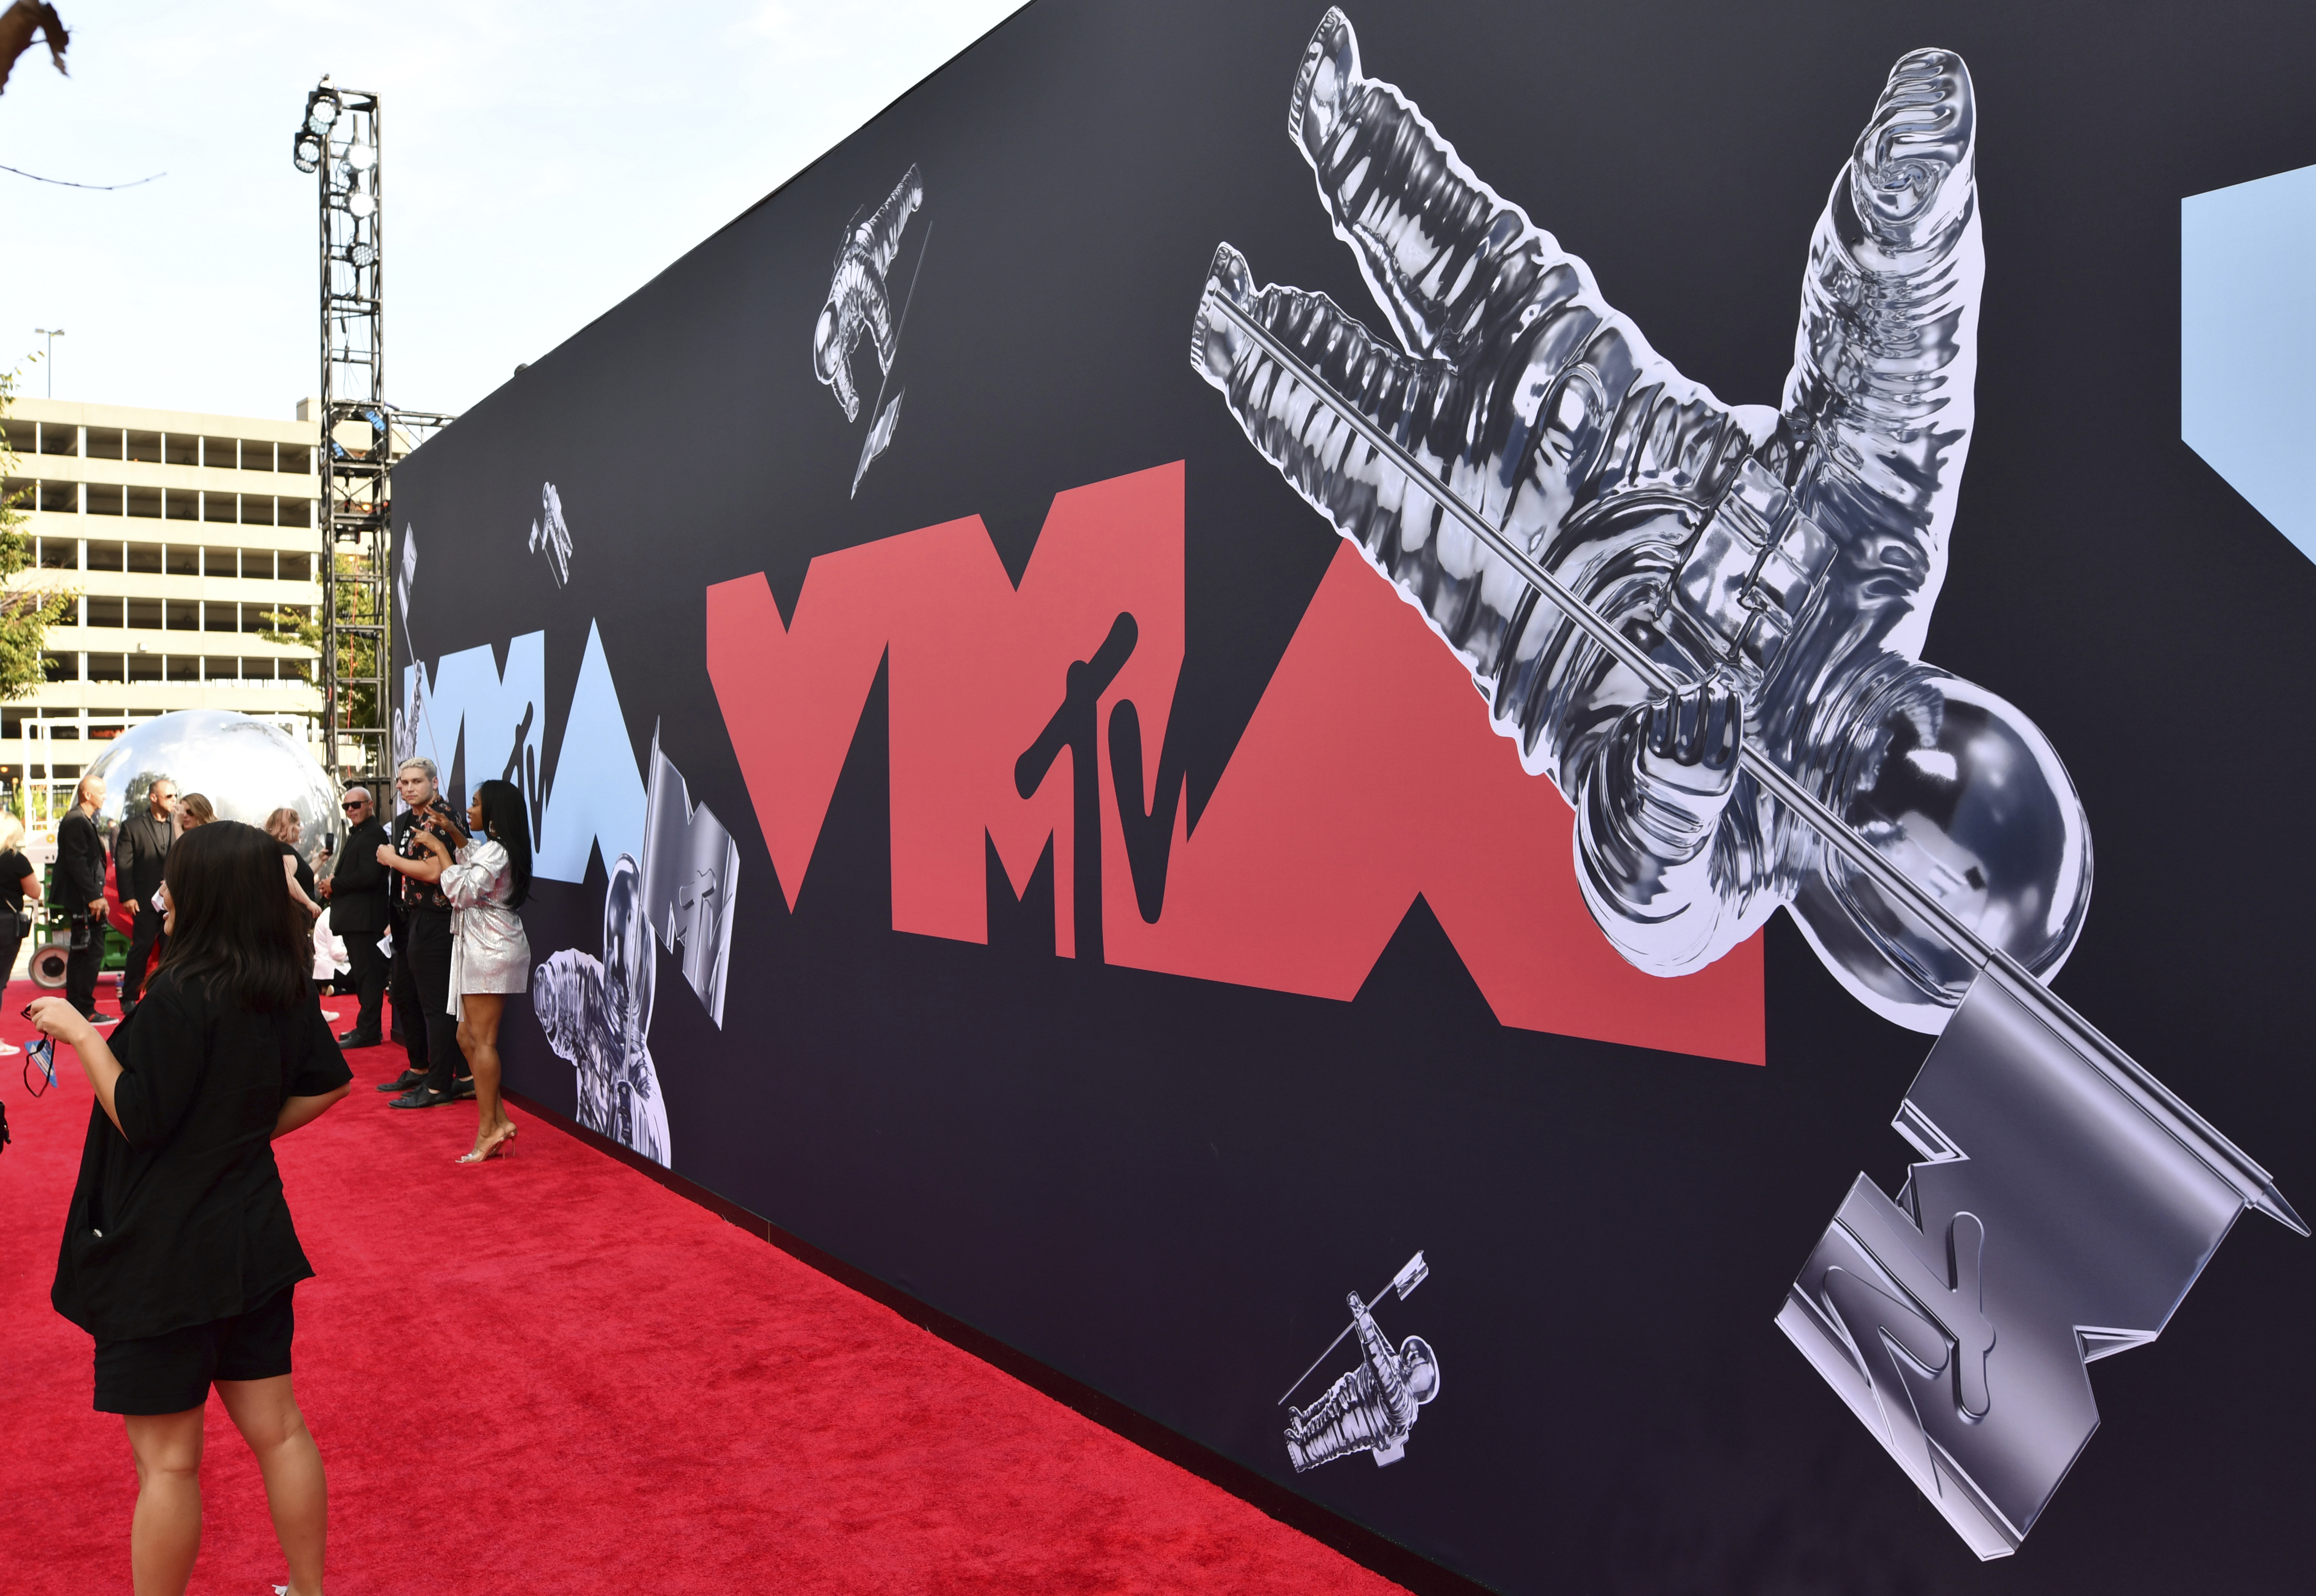 FILE - This Aug. 26, 2019 file photo shows a view of the red carpet at the MTV Video Music Awards in Newark, N.J. An MTV spokesperson said Monday that the show will take place Aug. 30 at the Barclays Center in Brooklyn, New York. Photo: AP